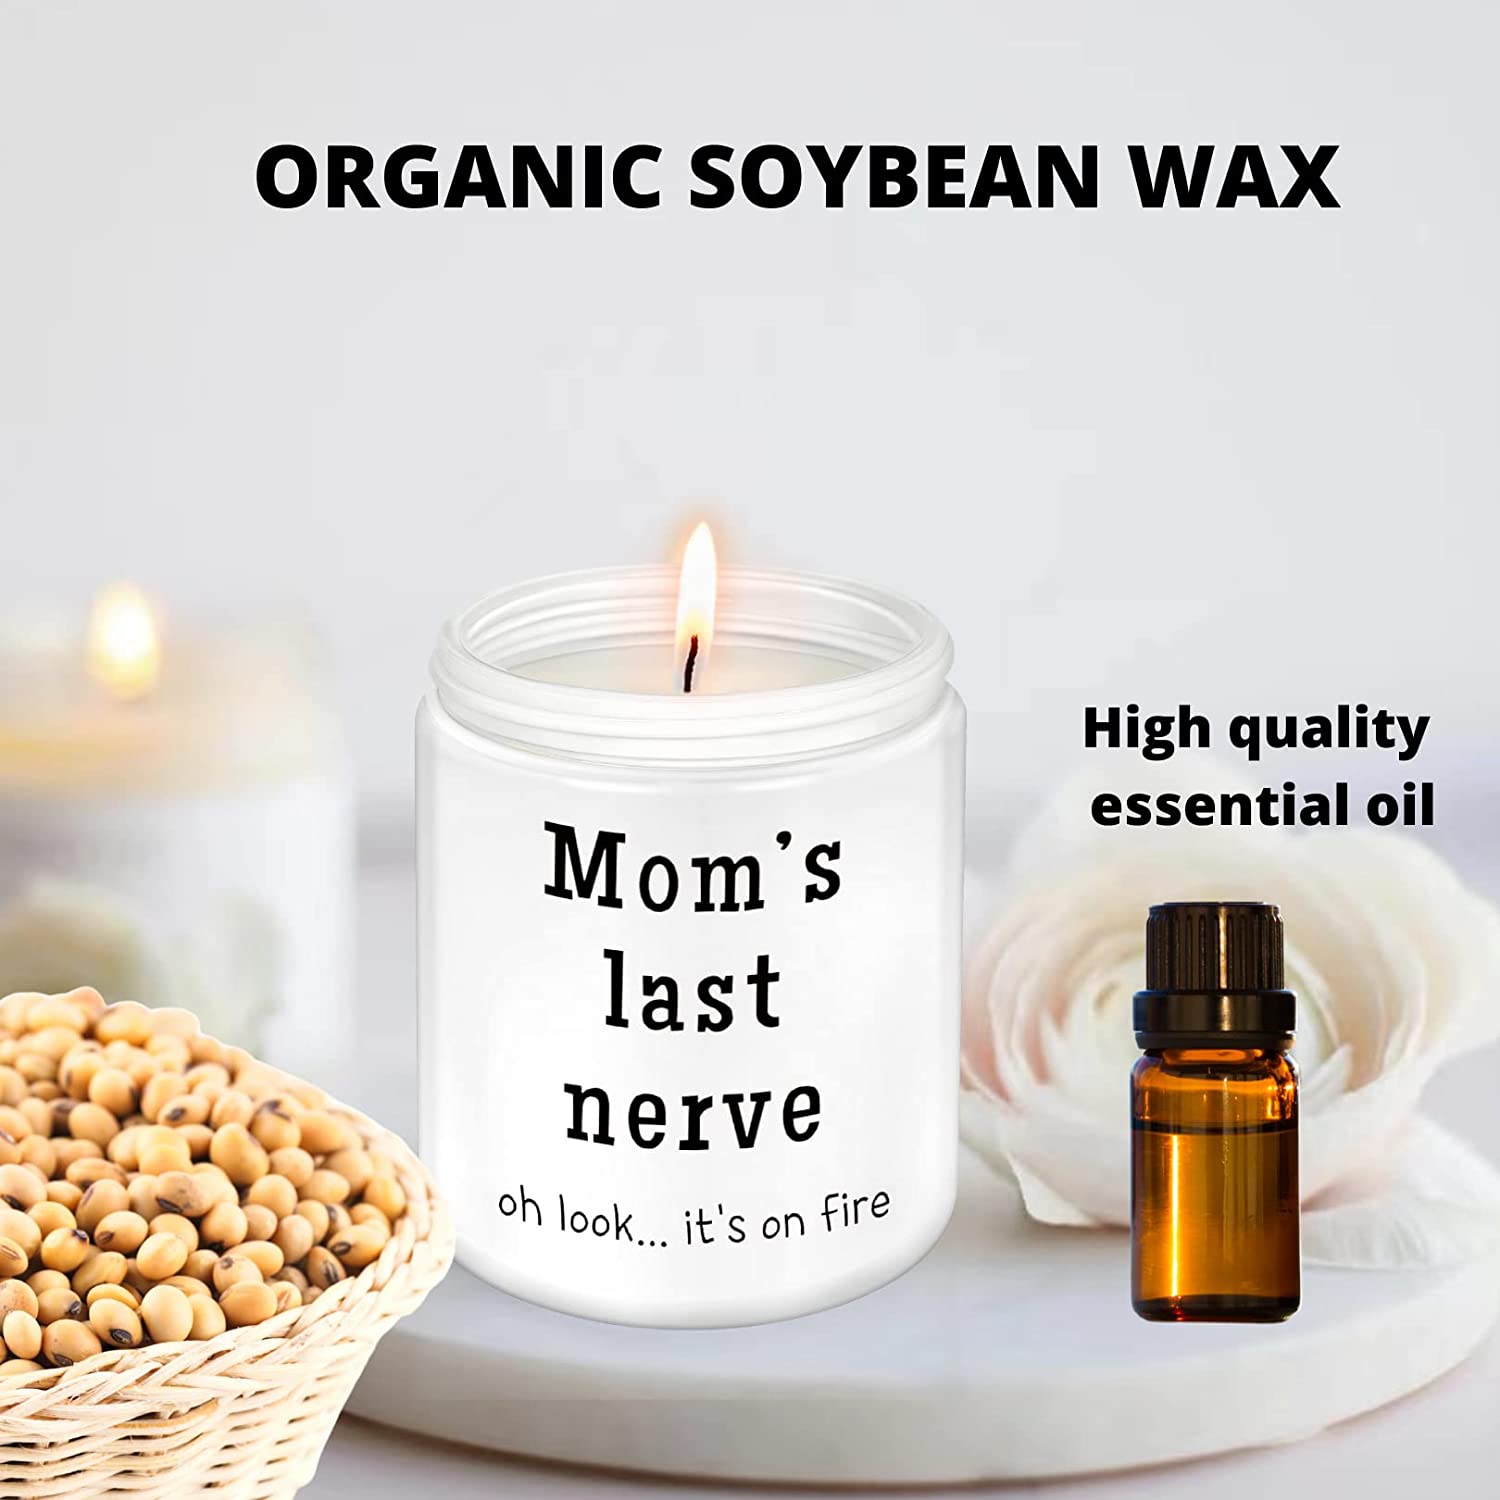 A white candle in a jar, there is text on the candle jar which says, 'Mom's last nerve, oh look... its on fire.' There is also a small brown bottle which says, 'High quality essential oil.'